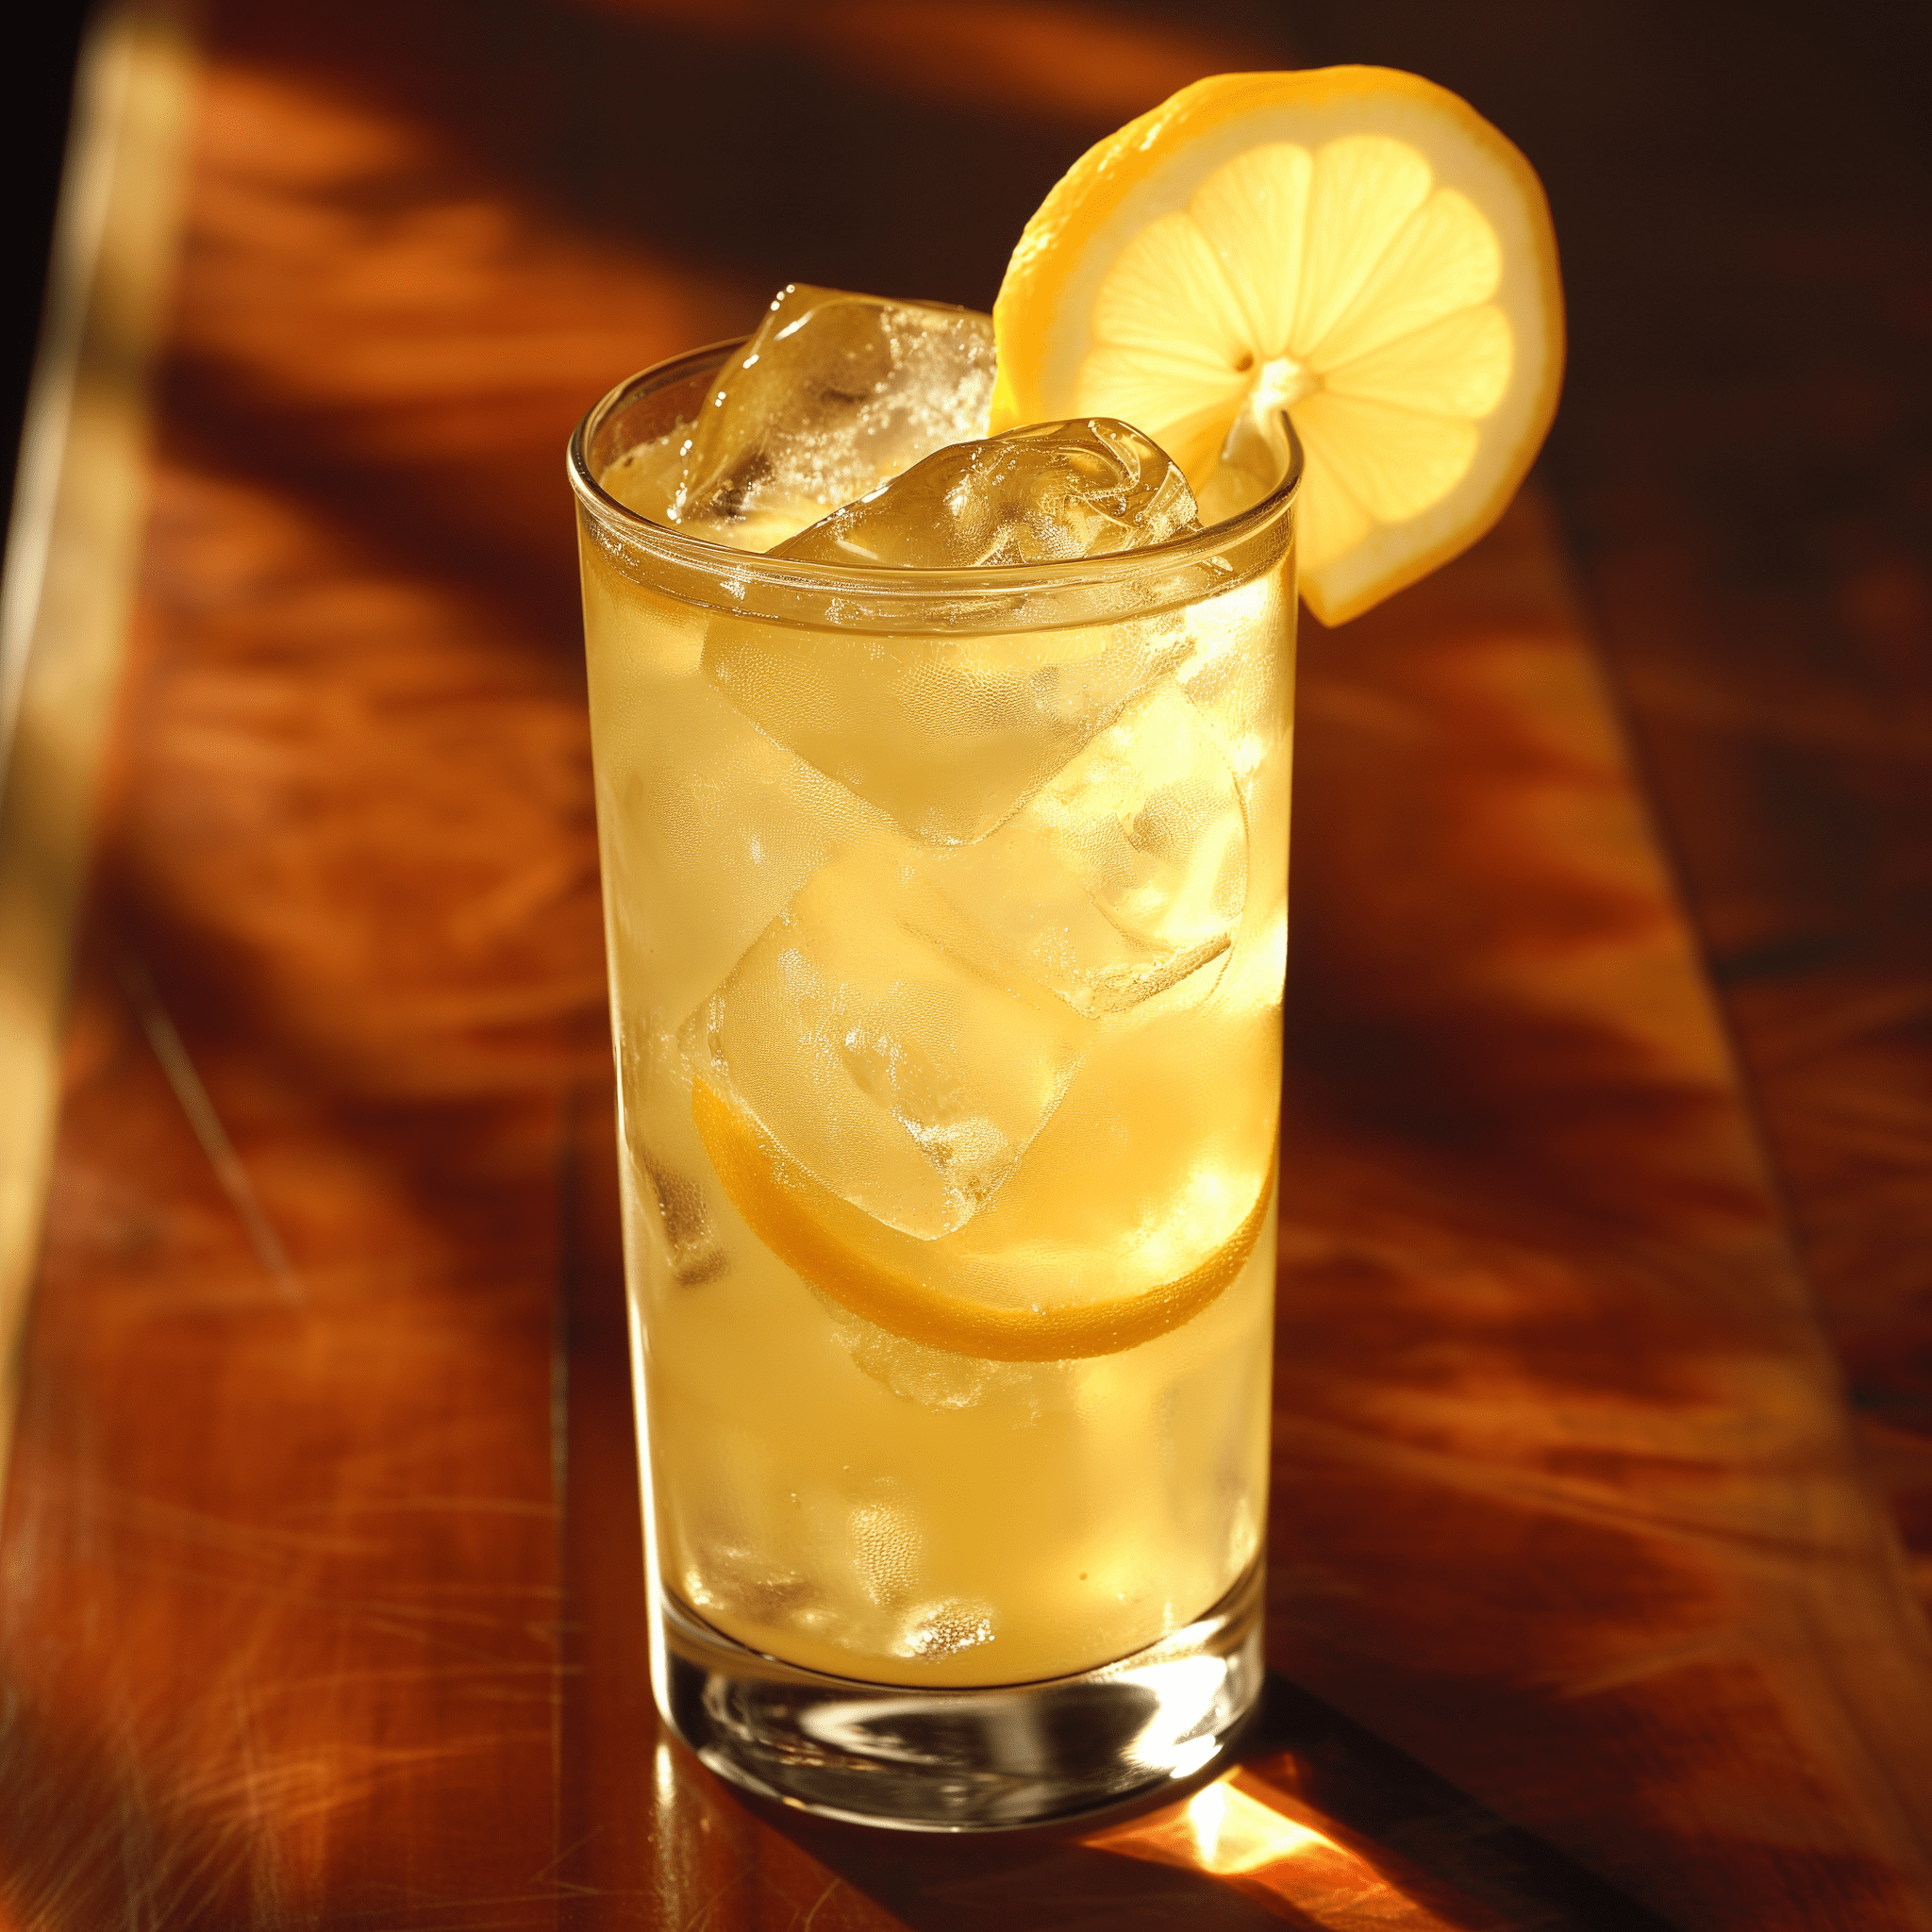 Jim Beam Lemonade Cocktail Recipe - The taste of a Jim Beam Lemonade is a harmonious blend of sweet and tart with the distinct kick of bourbon. The lemonade provides a refreshing citrusy base, while the Jim Beam adds a smooth, oaky undertone with a hint of vanilla and caramel.